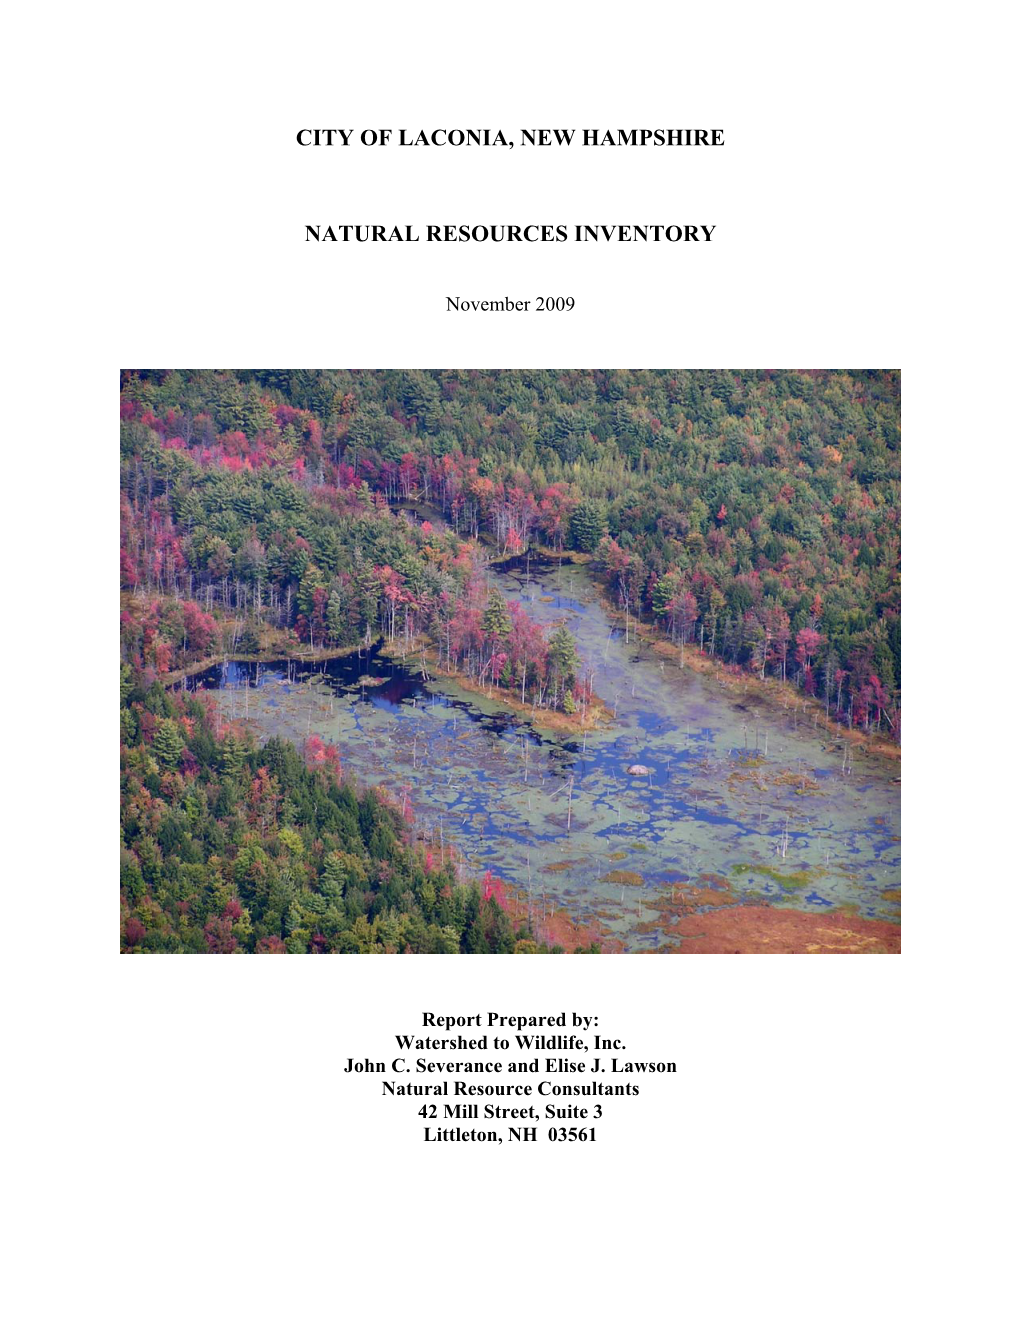 Laconia Natural Resource Inventory Wetlands, Hydric Soils and Aquifers with City Parcels September 2009 ´[